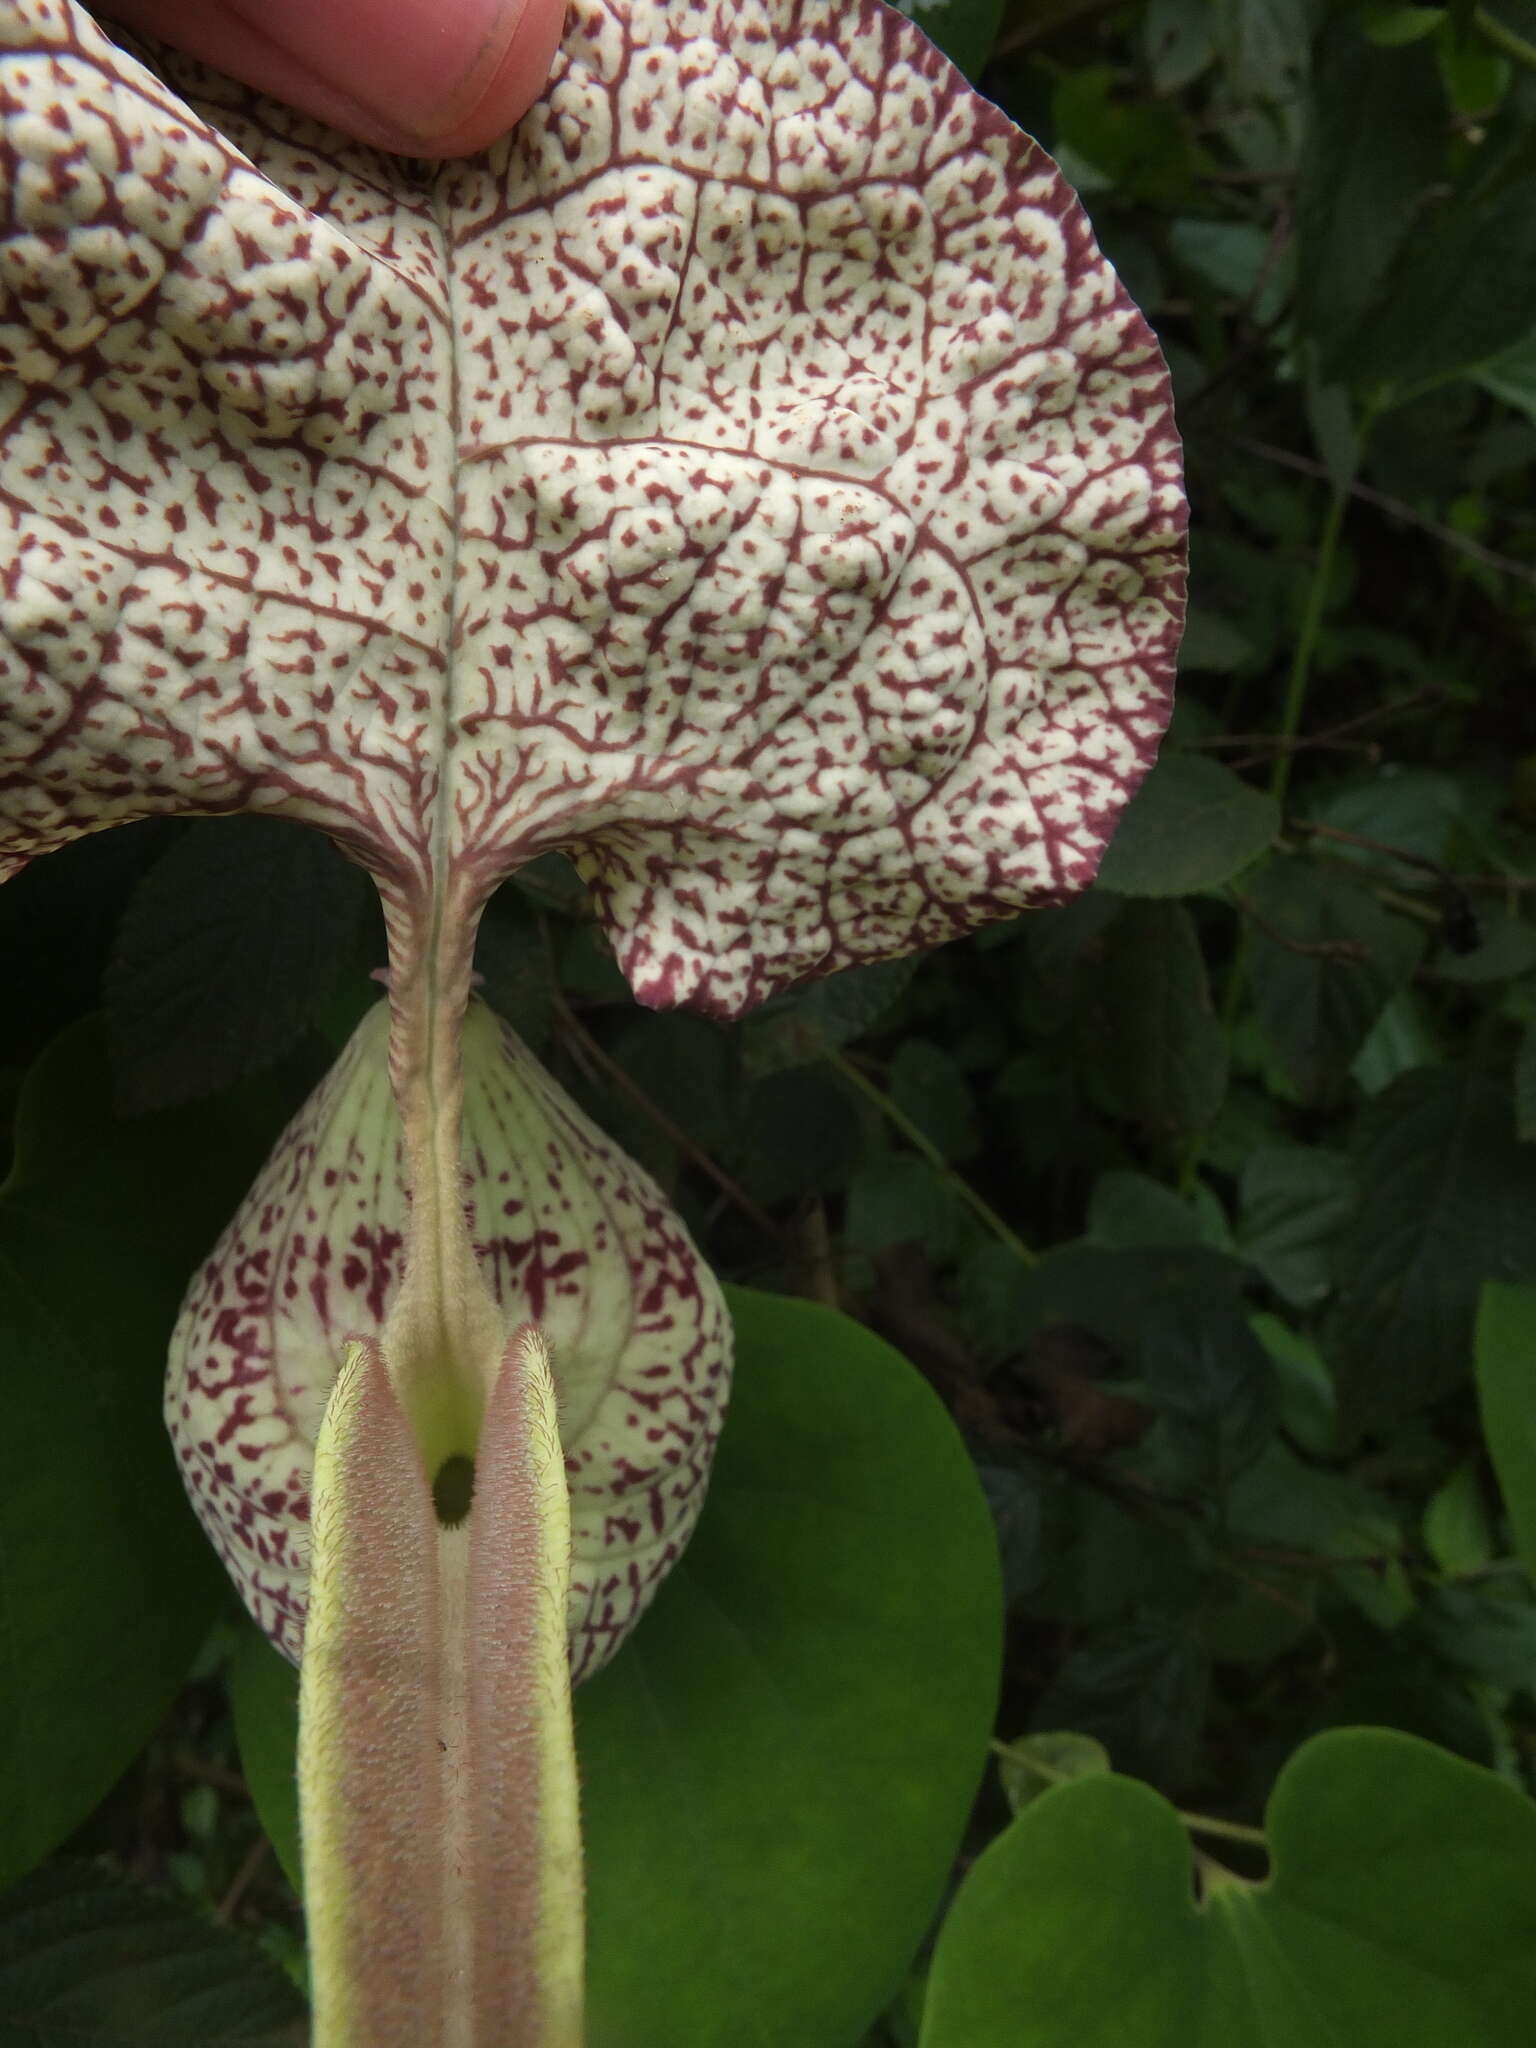 Image of mottled dutchman's pipe